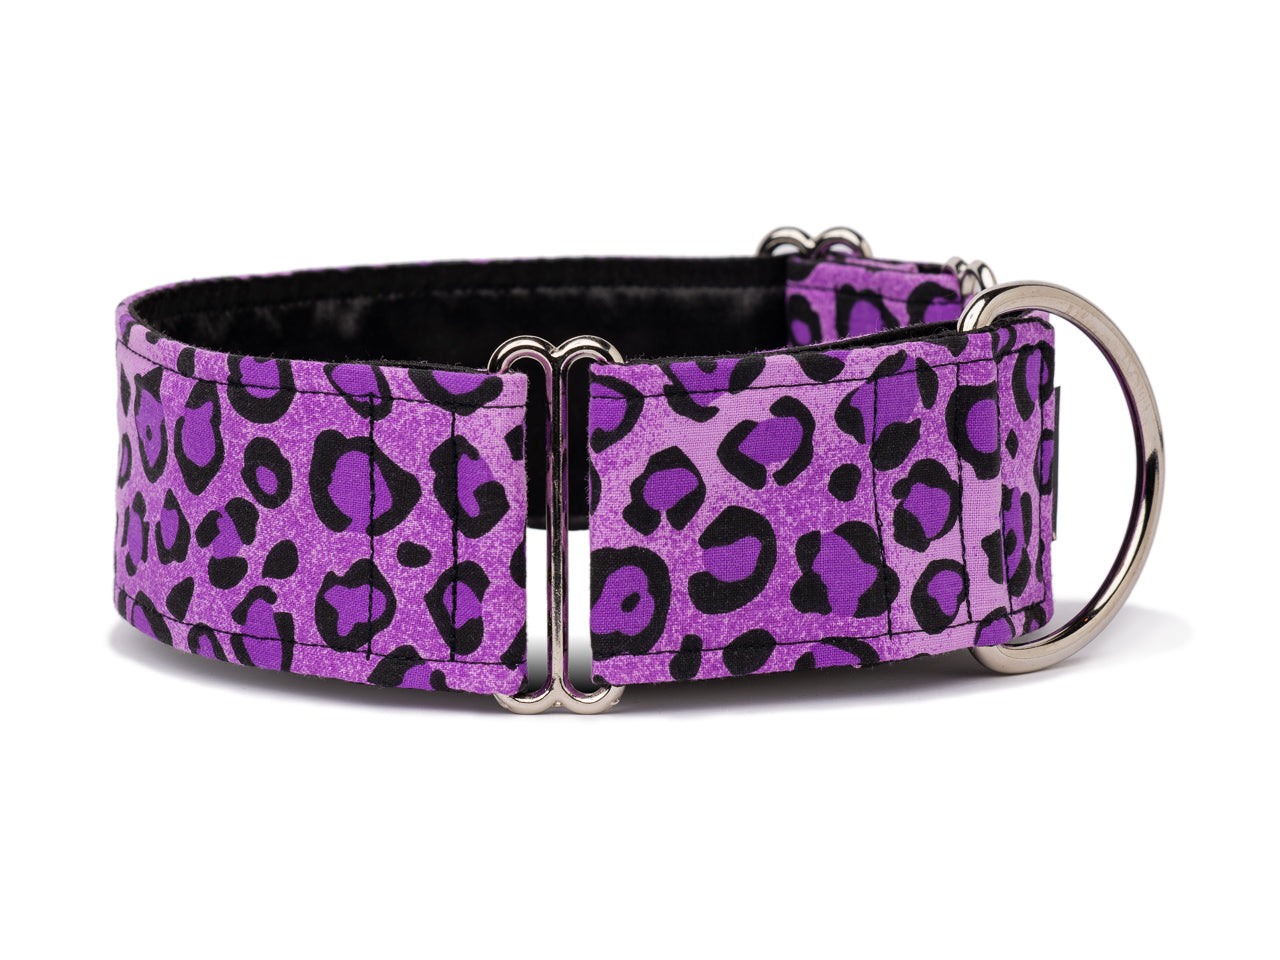 This funky purple leopard print adds a bright pop of color and personality for any fashion forward pooch!